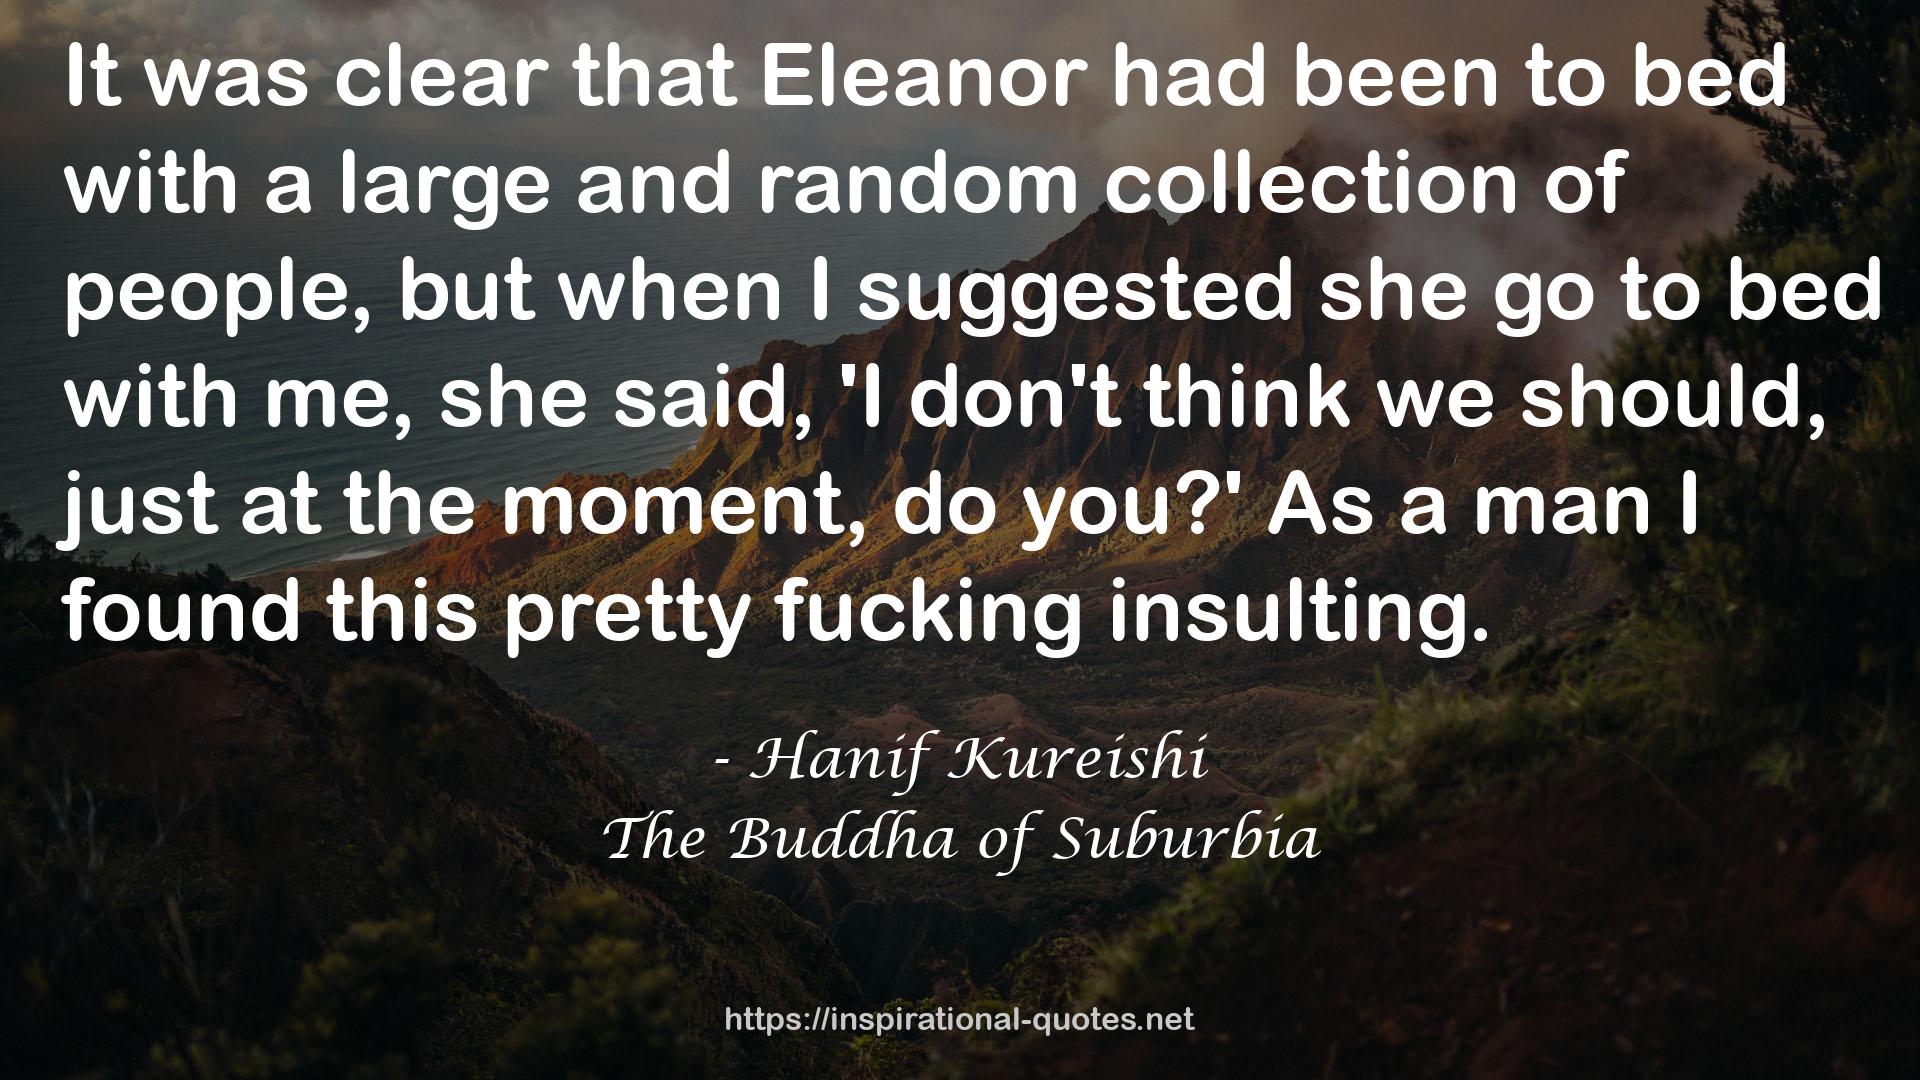 The Buddha of Suburbia QUOTES